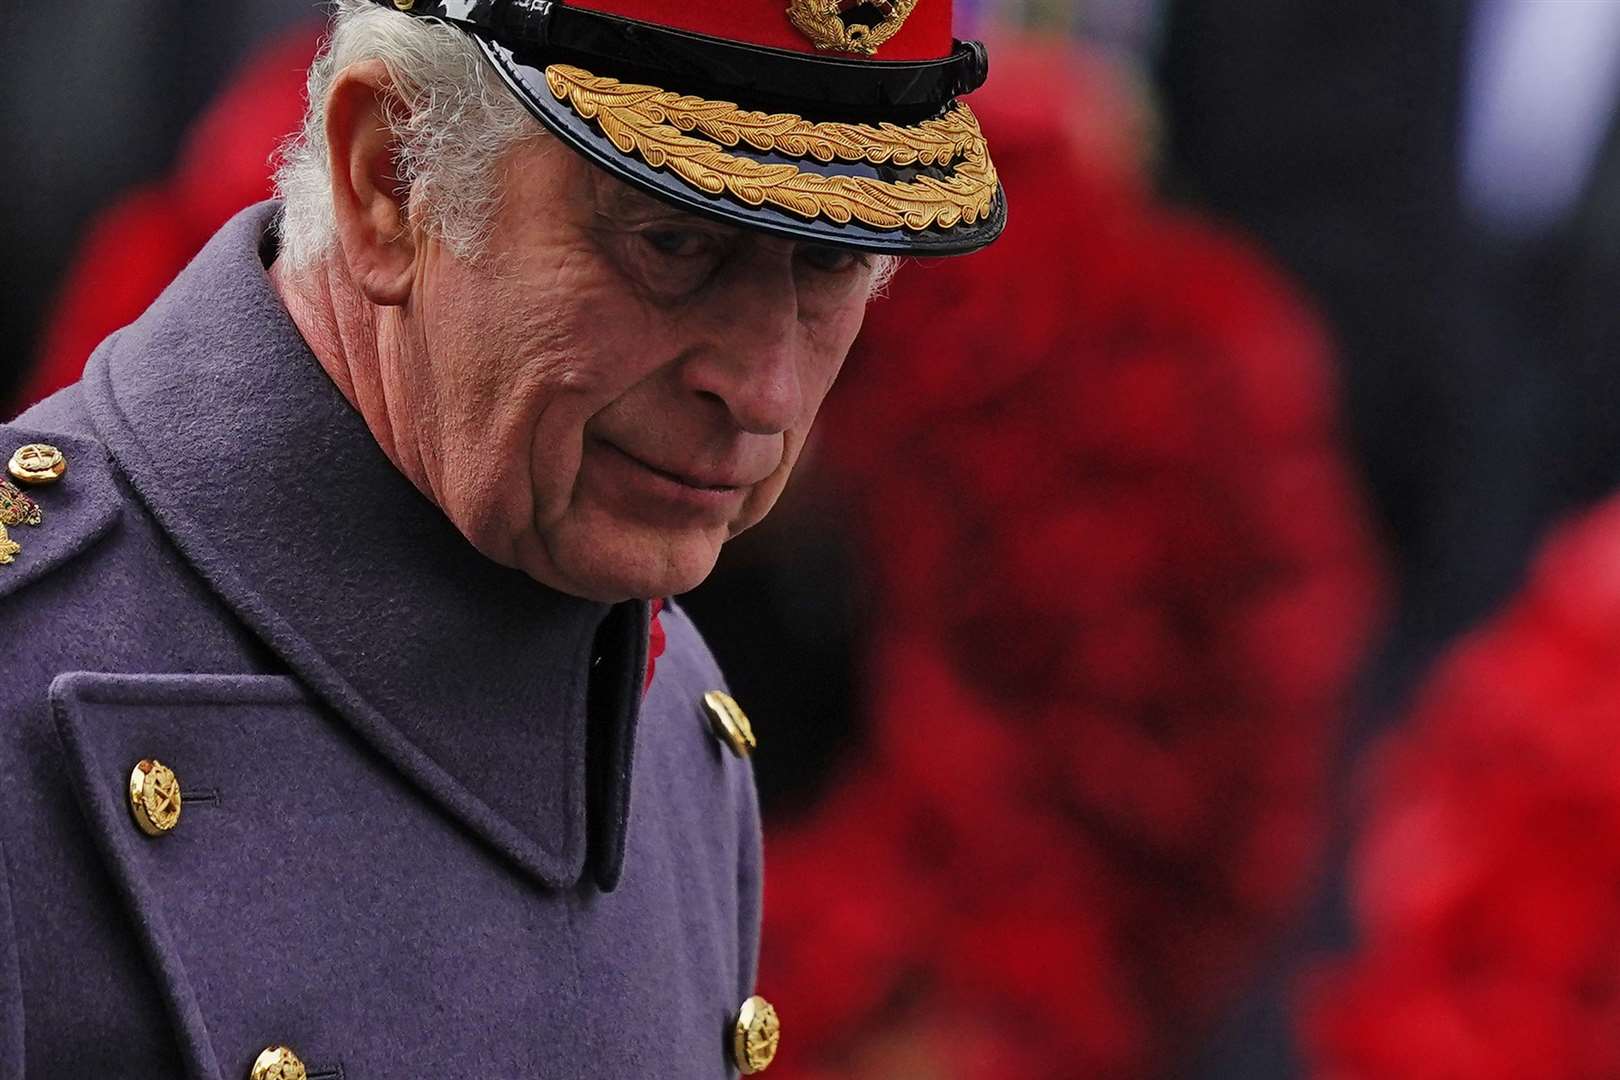 Charles during the Remembrance Sunday service at the Cenotaph. Aaron Chown/PA